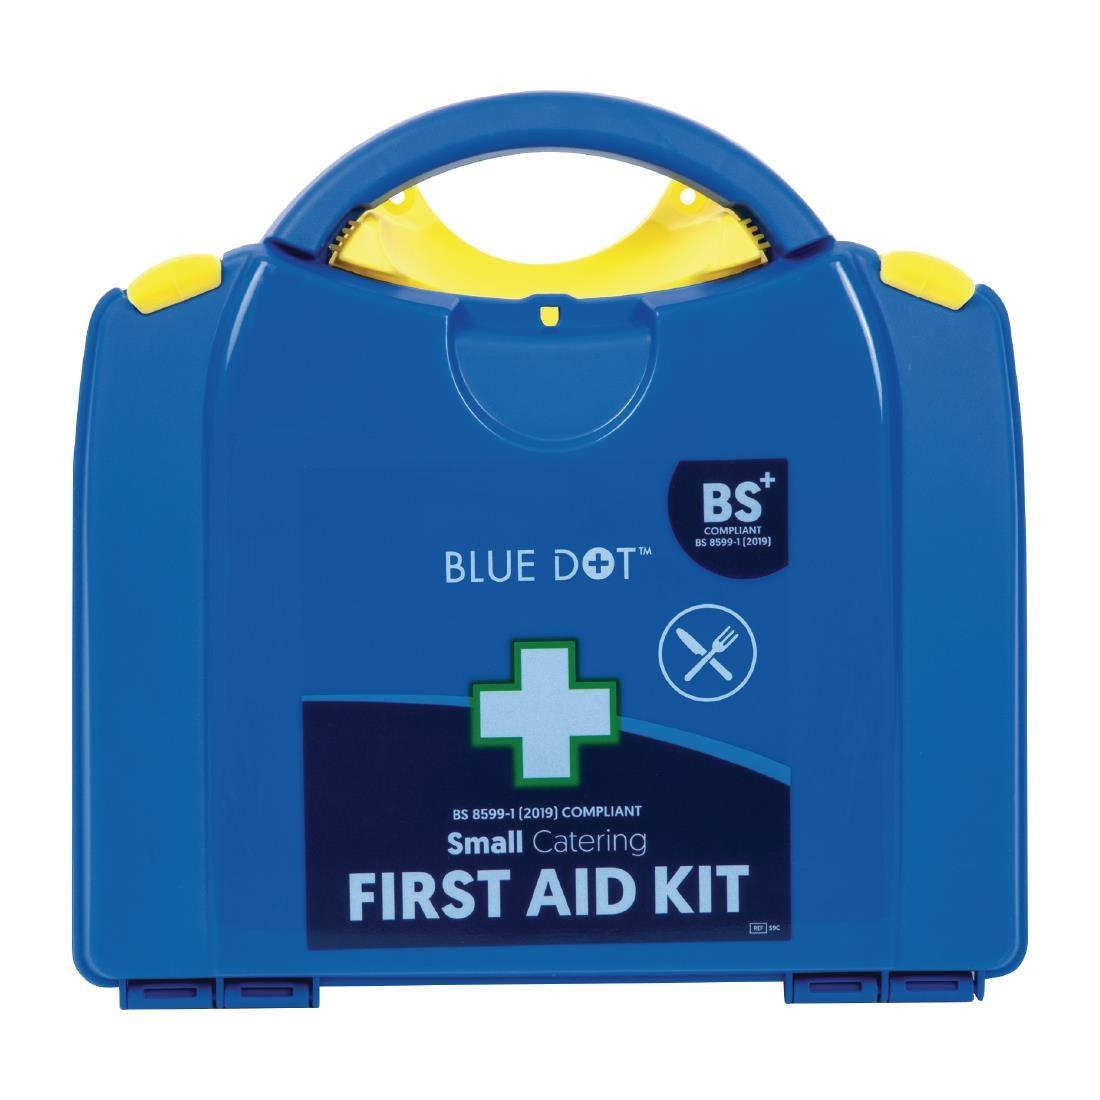 Small Catering First Aid Kit BS 8599-1:2019 - FB416  - 1